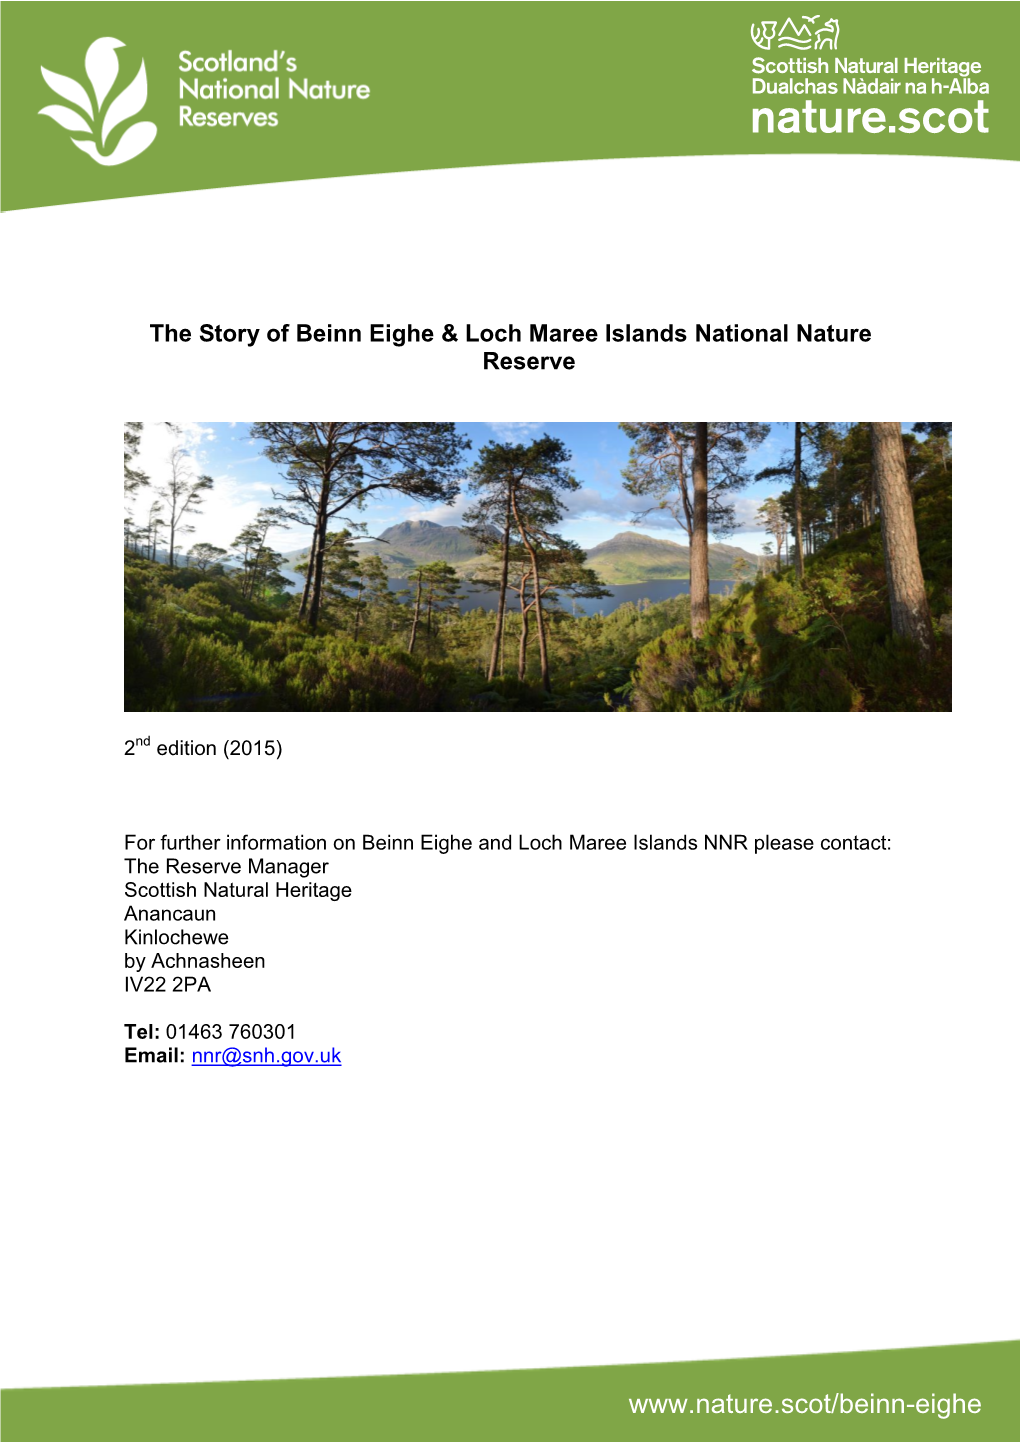 The Story of Beinn Eighe and Loch Maree Islands National Nature Reserve